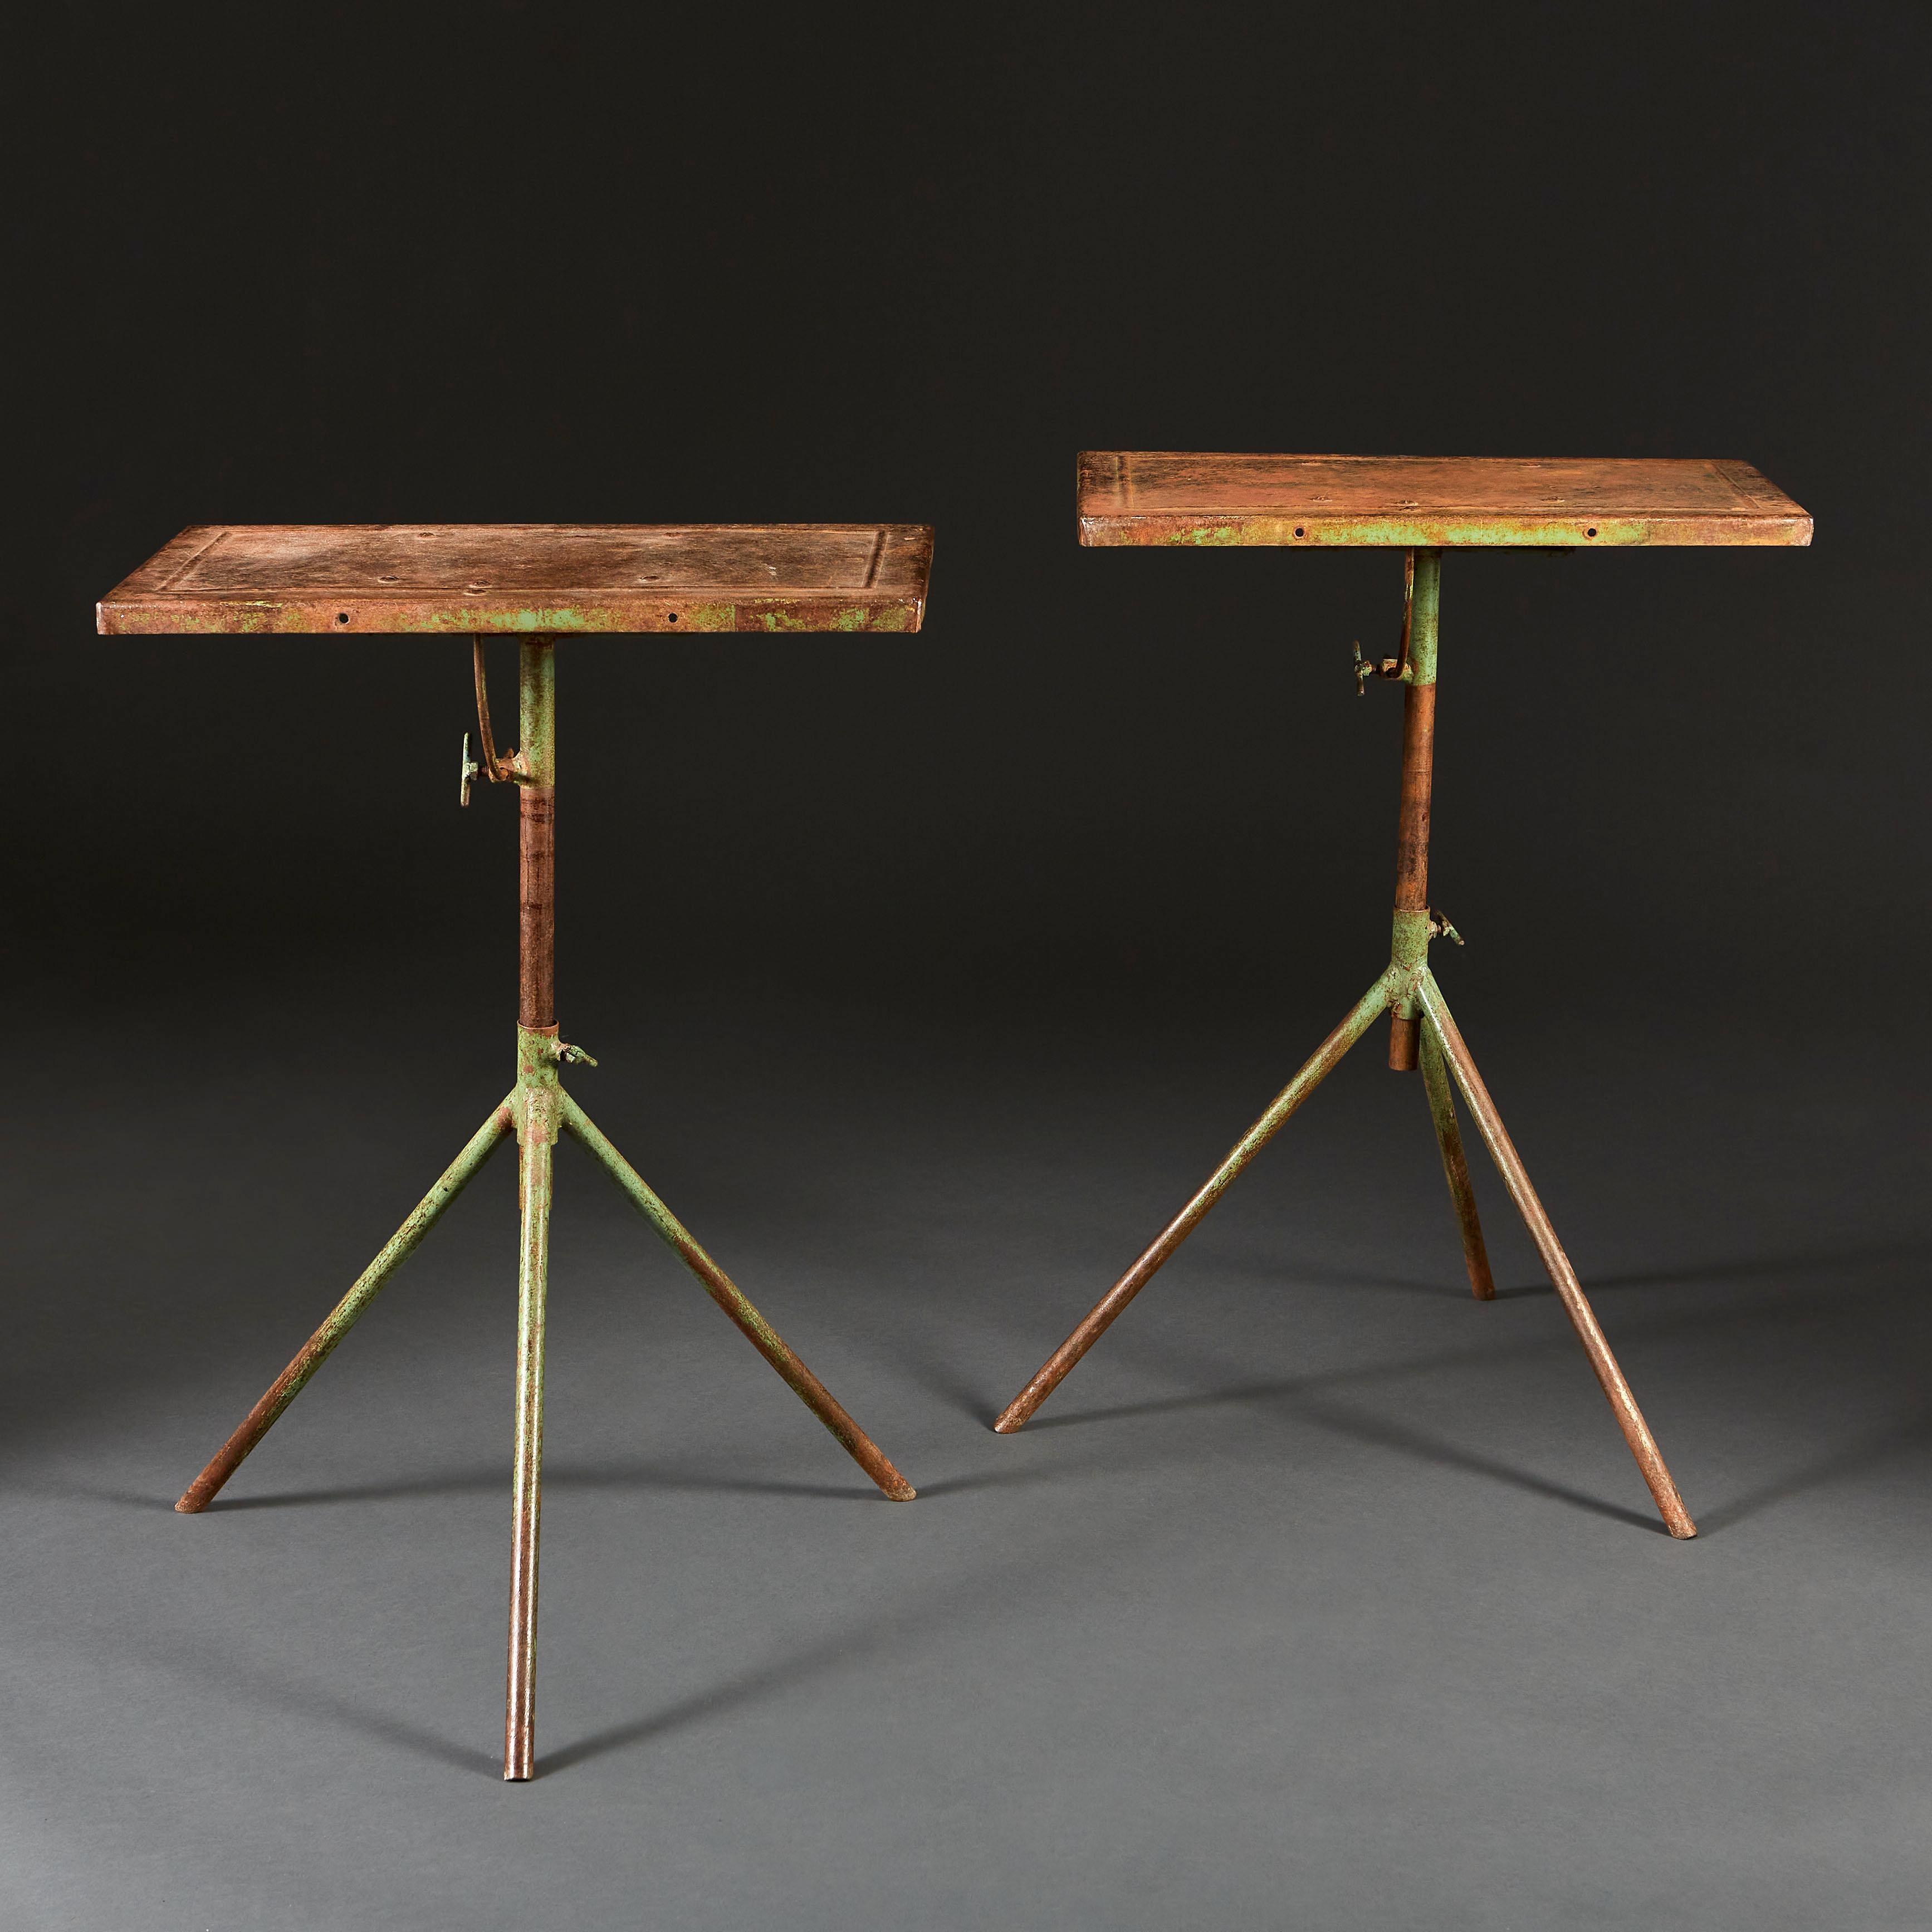 A pair of mid twentieth century industrial tables with green painted tripod bases, with adjustable stems to alter the height, and rectangular adjustable tilt tops. 

Measures: Height as photographed 80.50cm
Height at full extension 90.50cm.